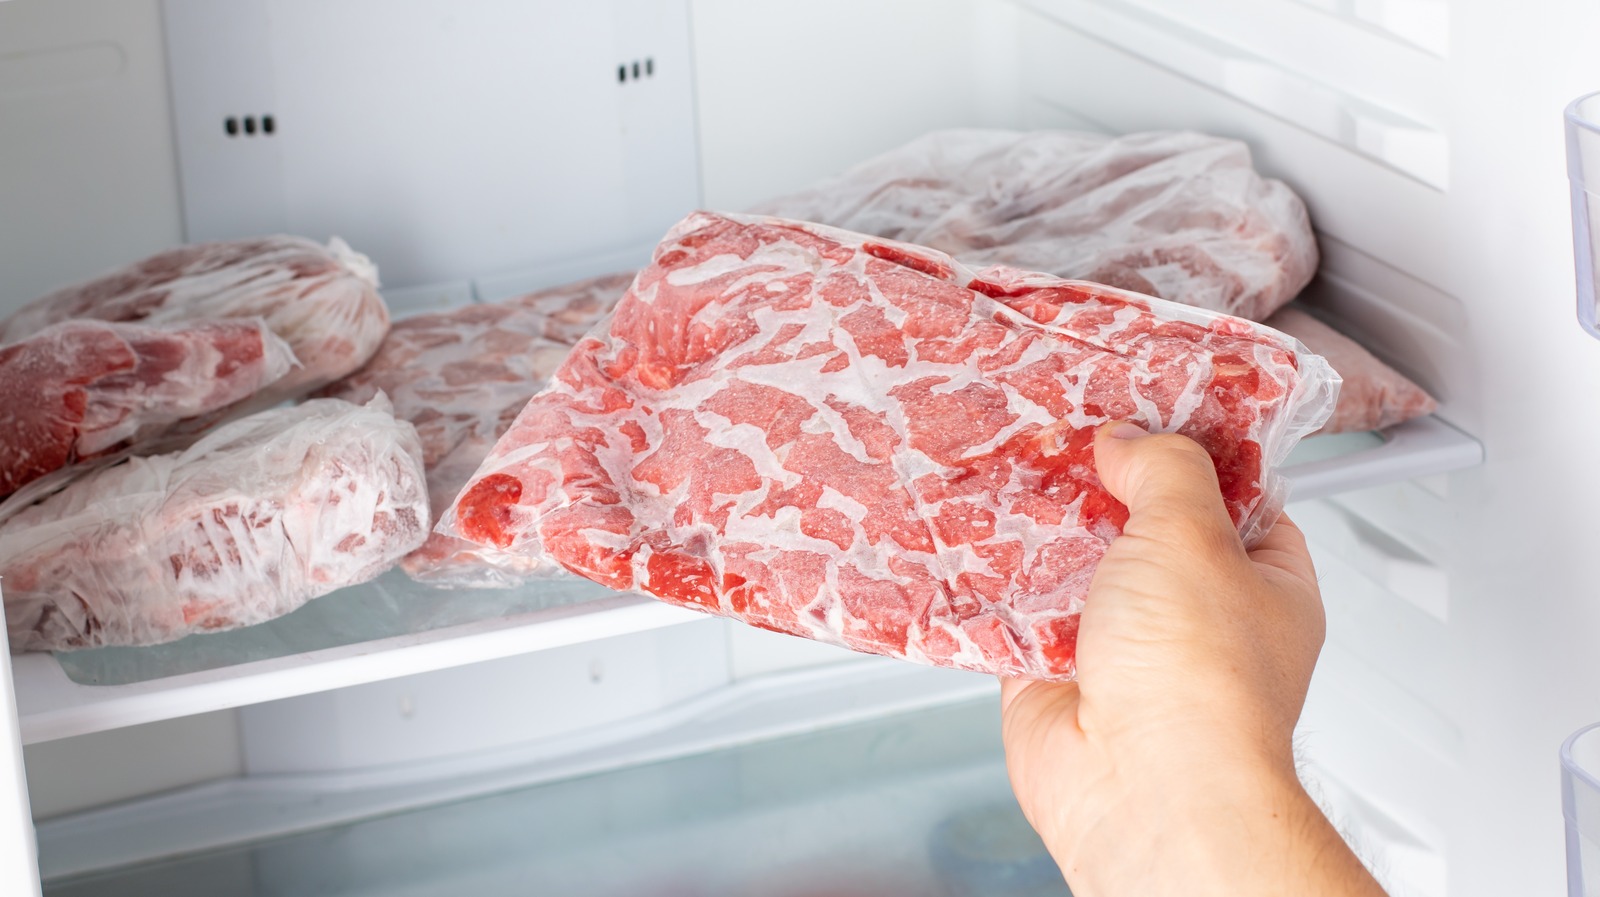 Is It Safe To Eat Meat That's Been Frozen For 2 Years?